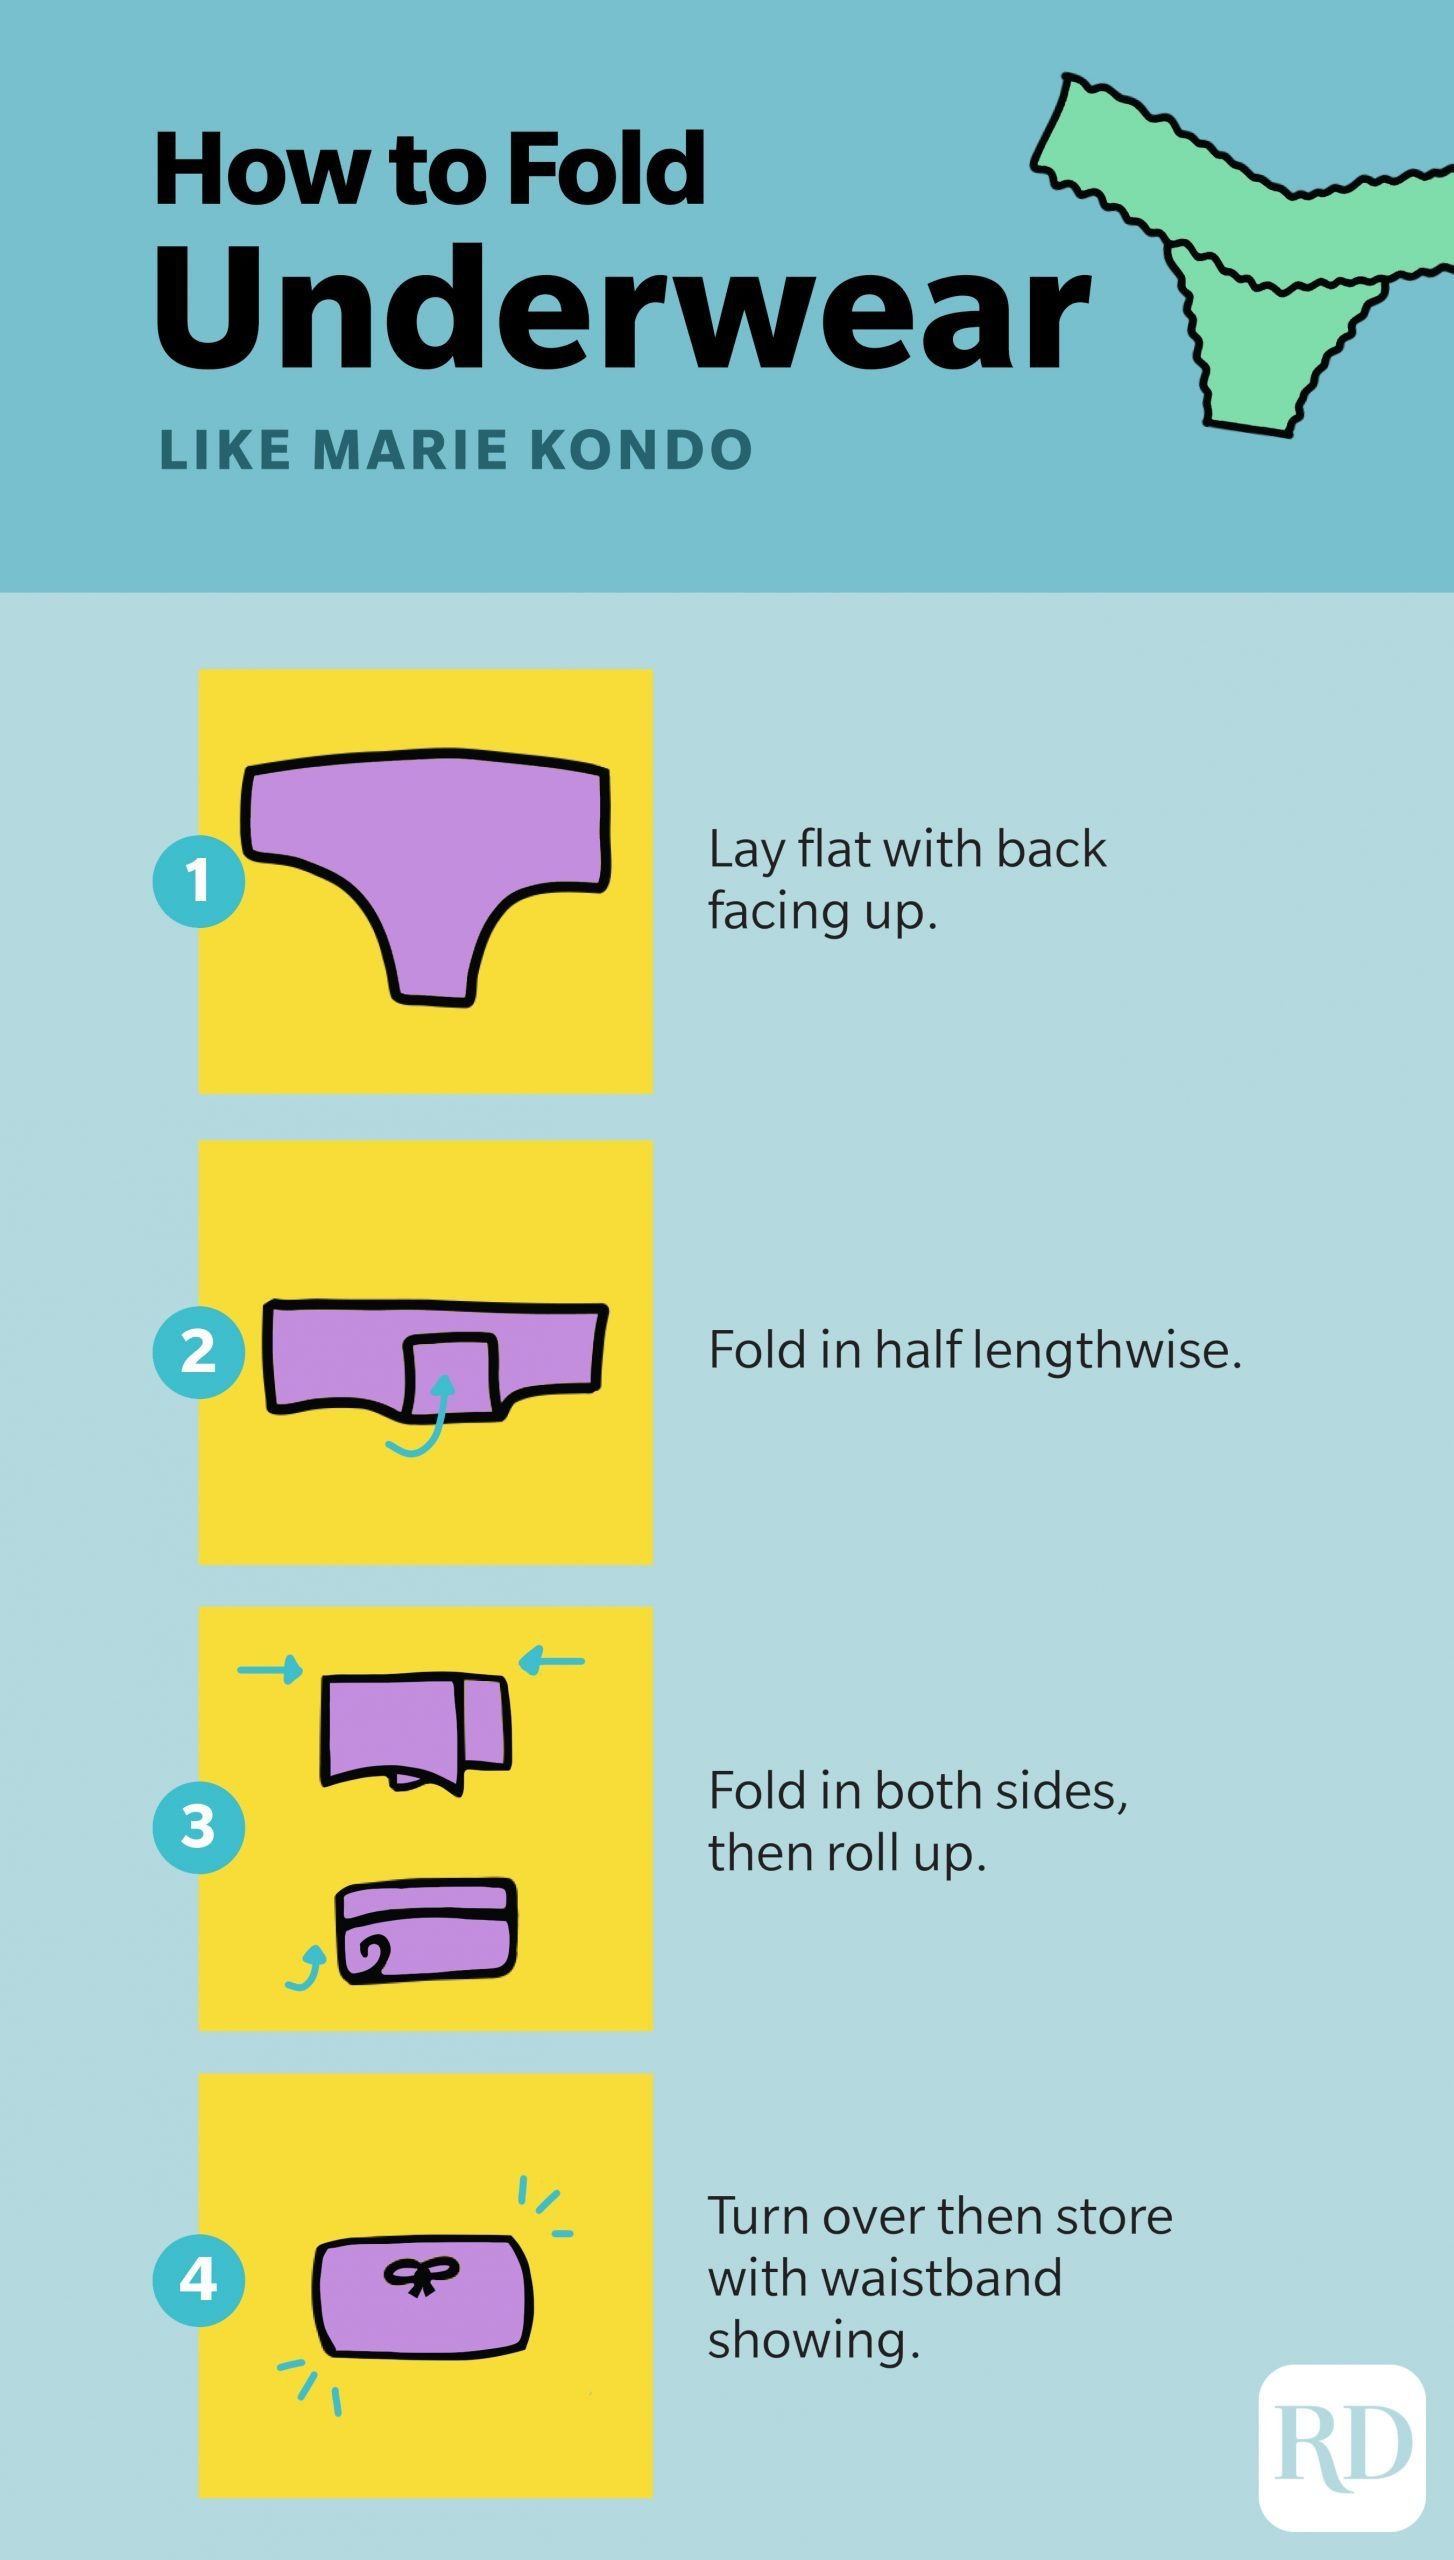 5 Simple Tips on How to Fold Underwear and Why You Should Do it